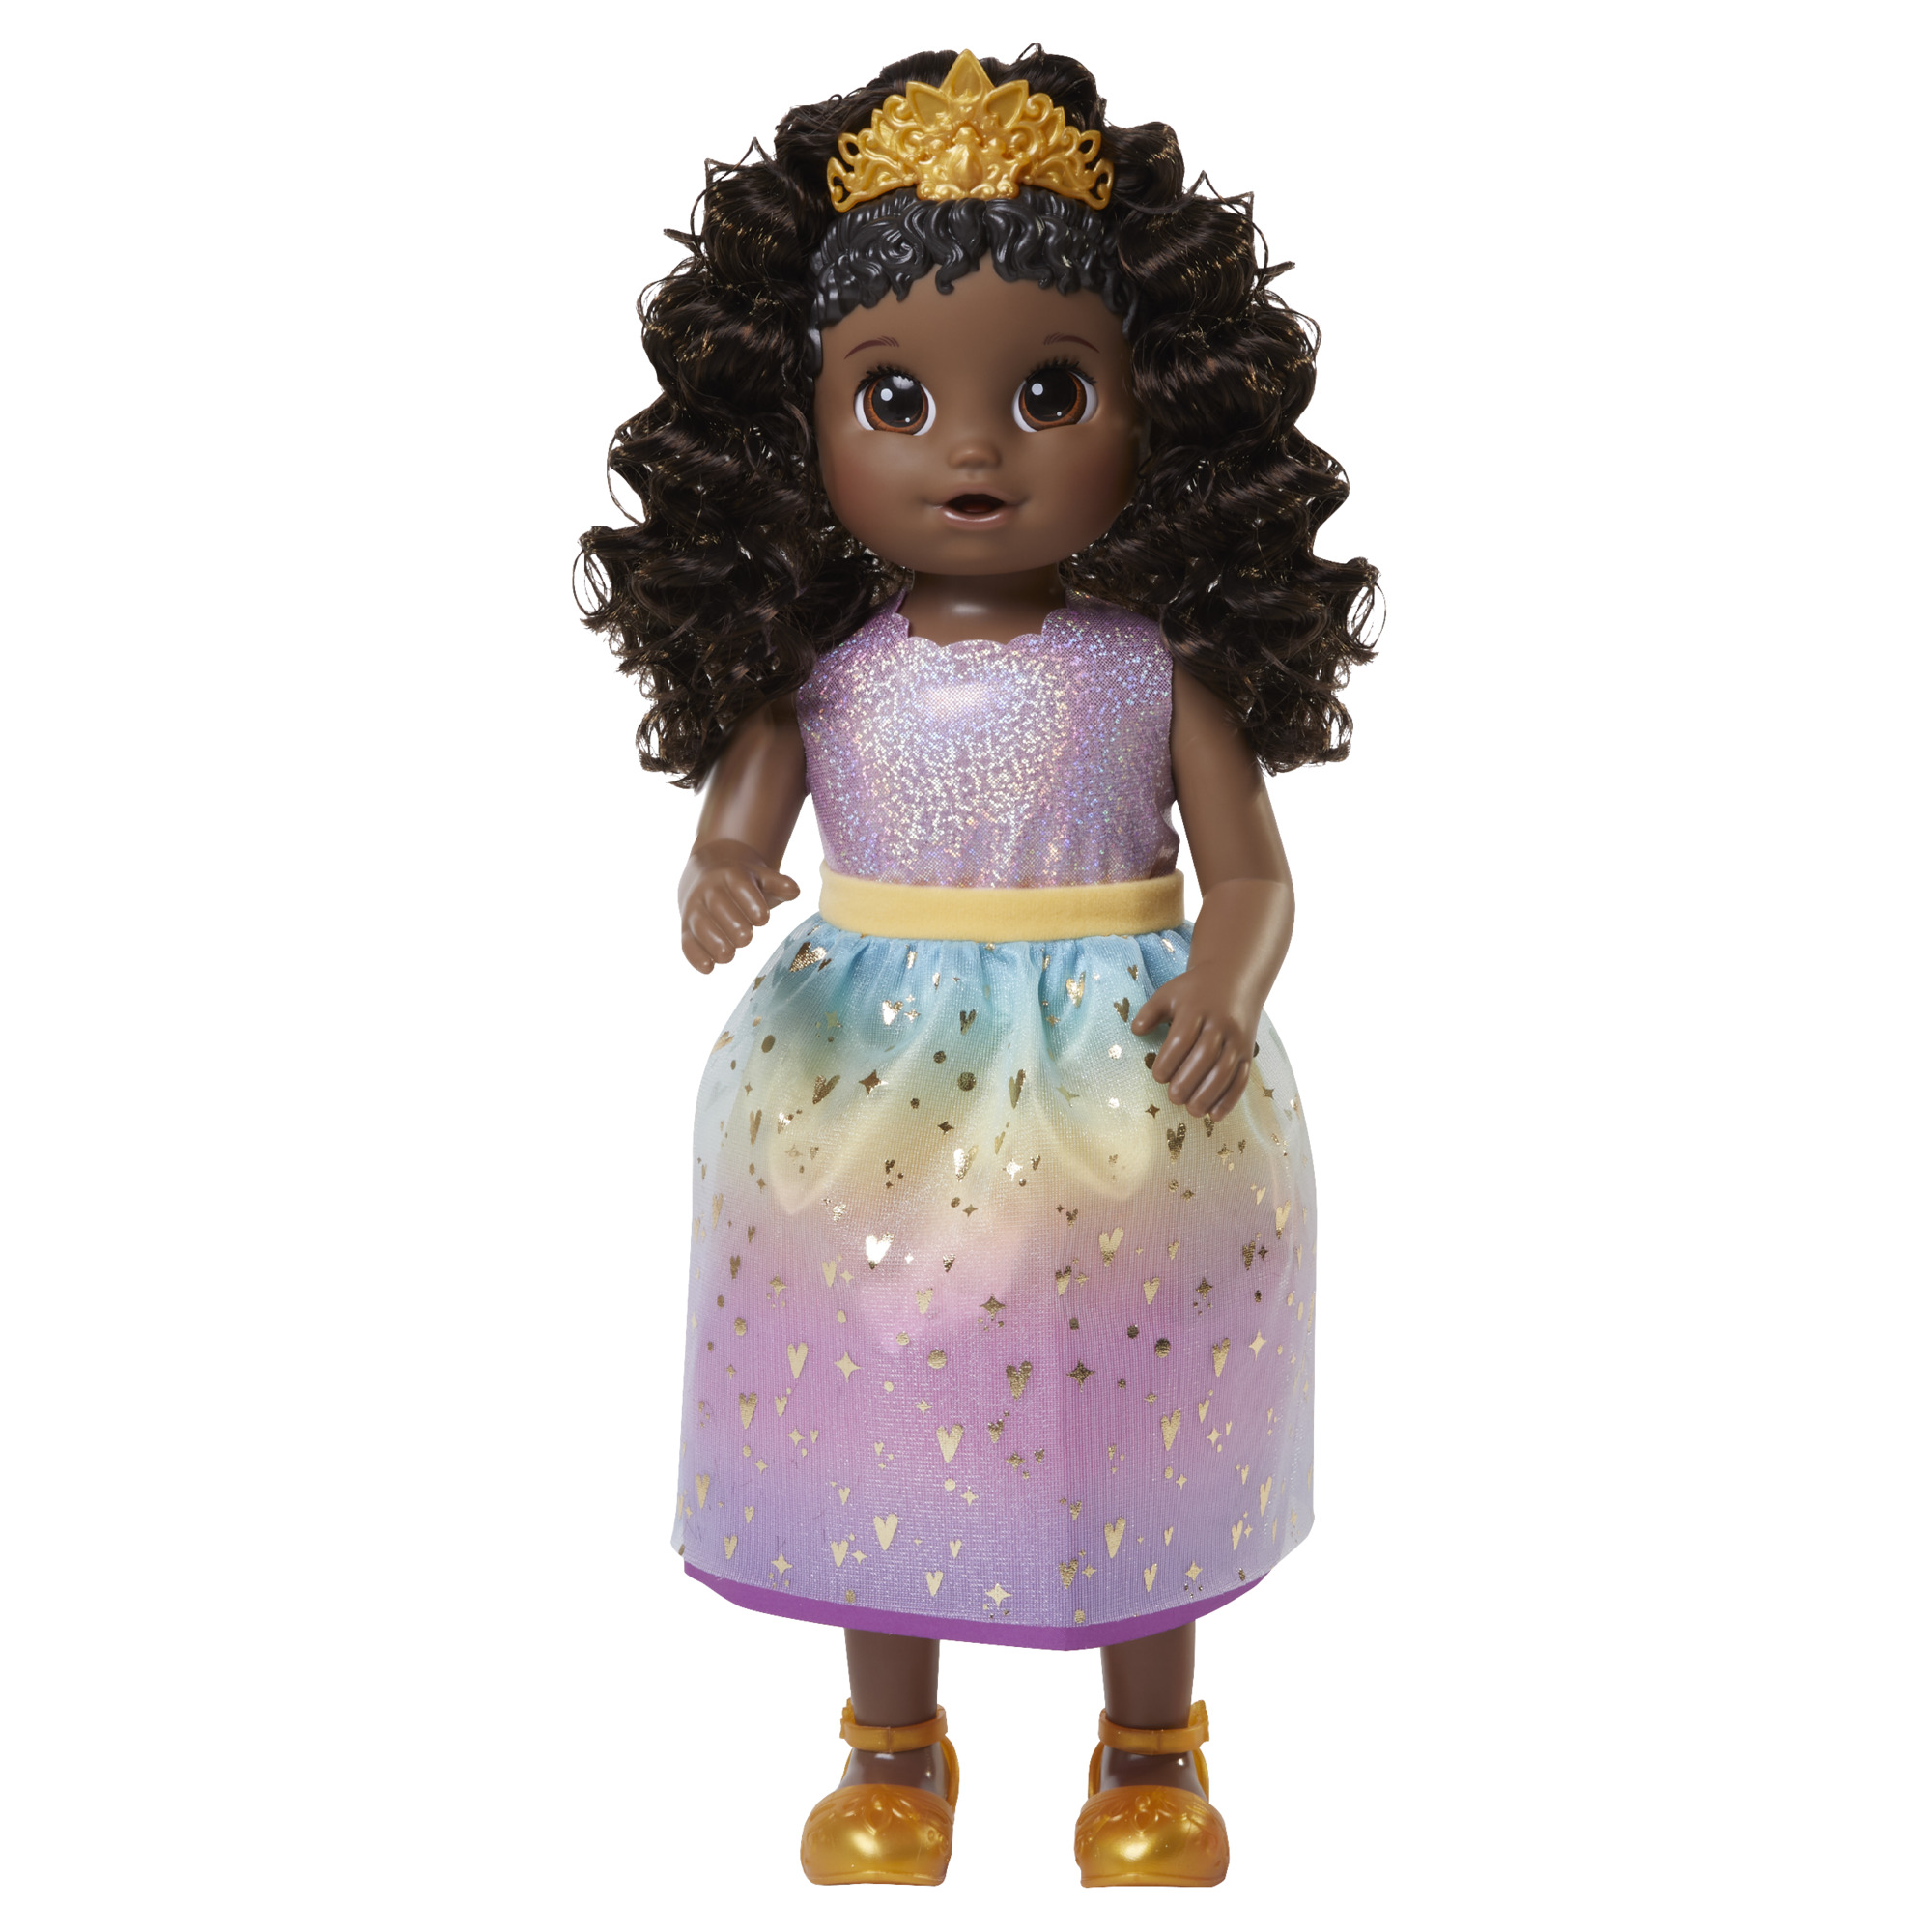 Baby Alive: Princess Ellie Grows Up! 15-Inch Doll Black Hair, Brown Eyes Kids Toy for Boys and Girls - image 5 of 12